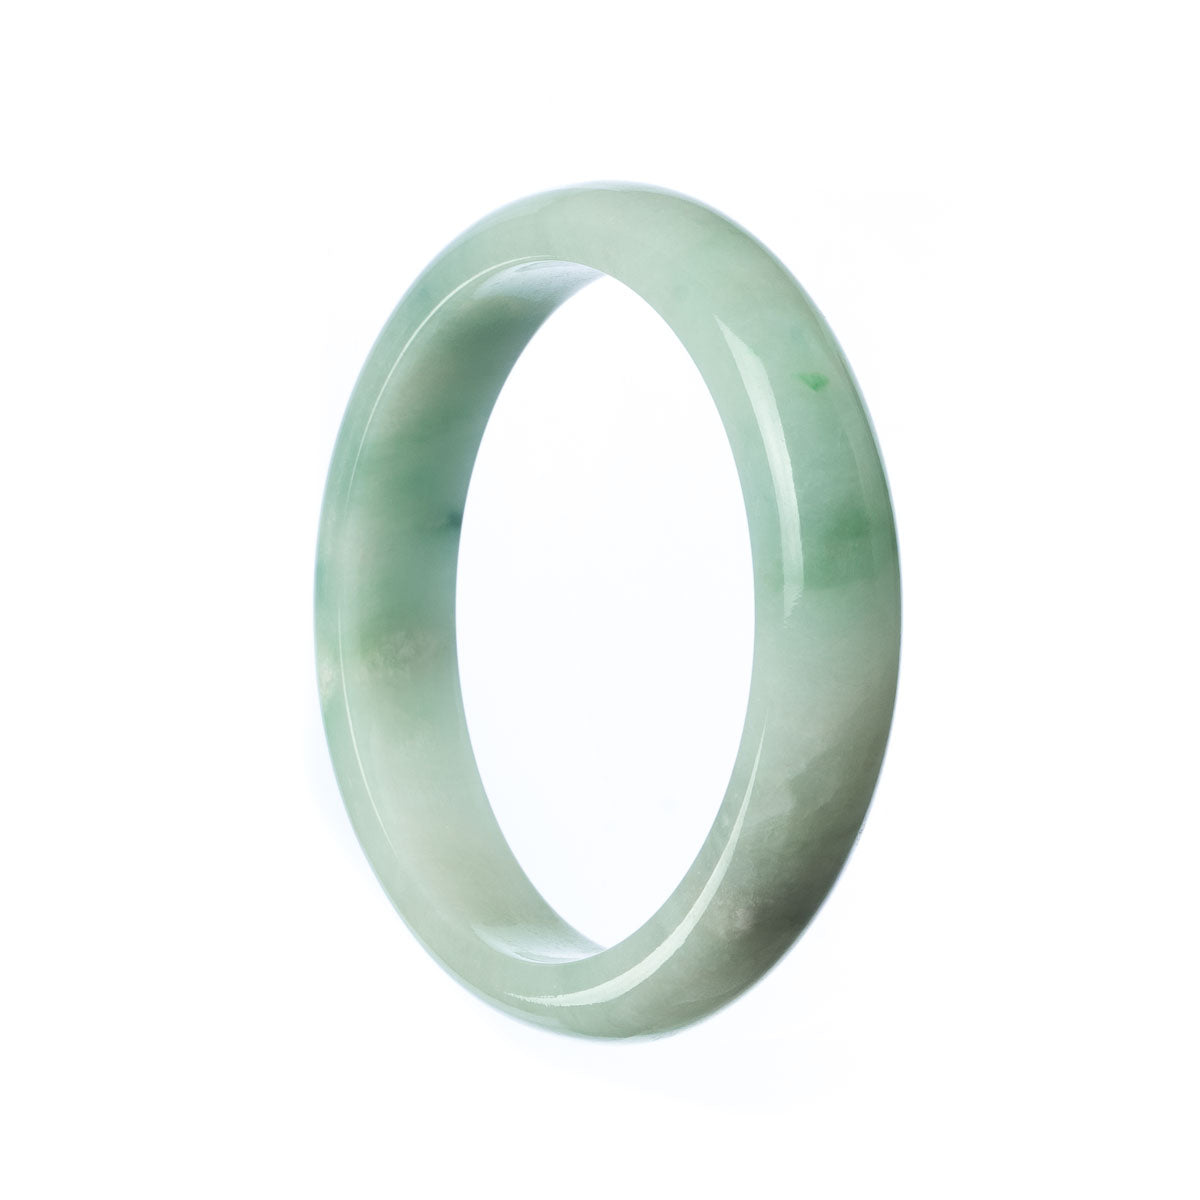 A close-up image of a half-moon shaped pale green jadeite bangle bracelet. The bracelet is made of authentic Type A jadeite and measures 55mm in diameter. It features a smooth and polished surface, showcasing the natural beauty of the jadeite stone. This bracelet is from the MAYS collection.